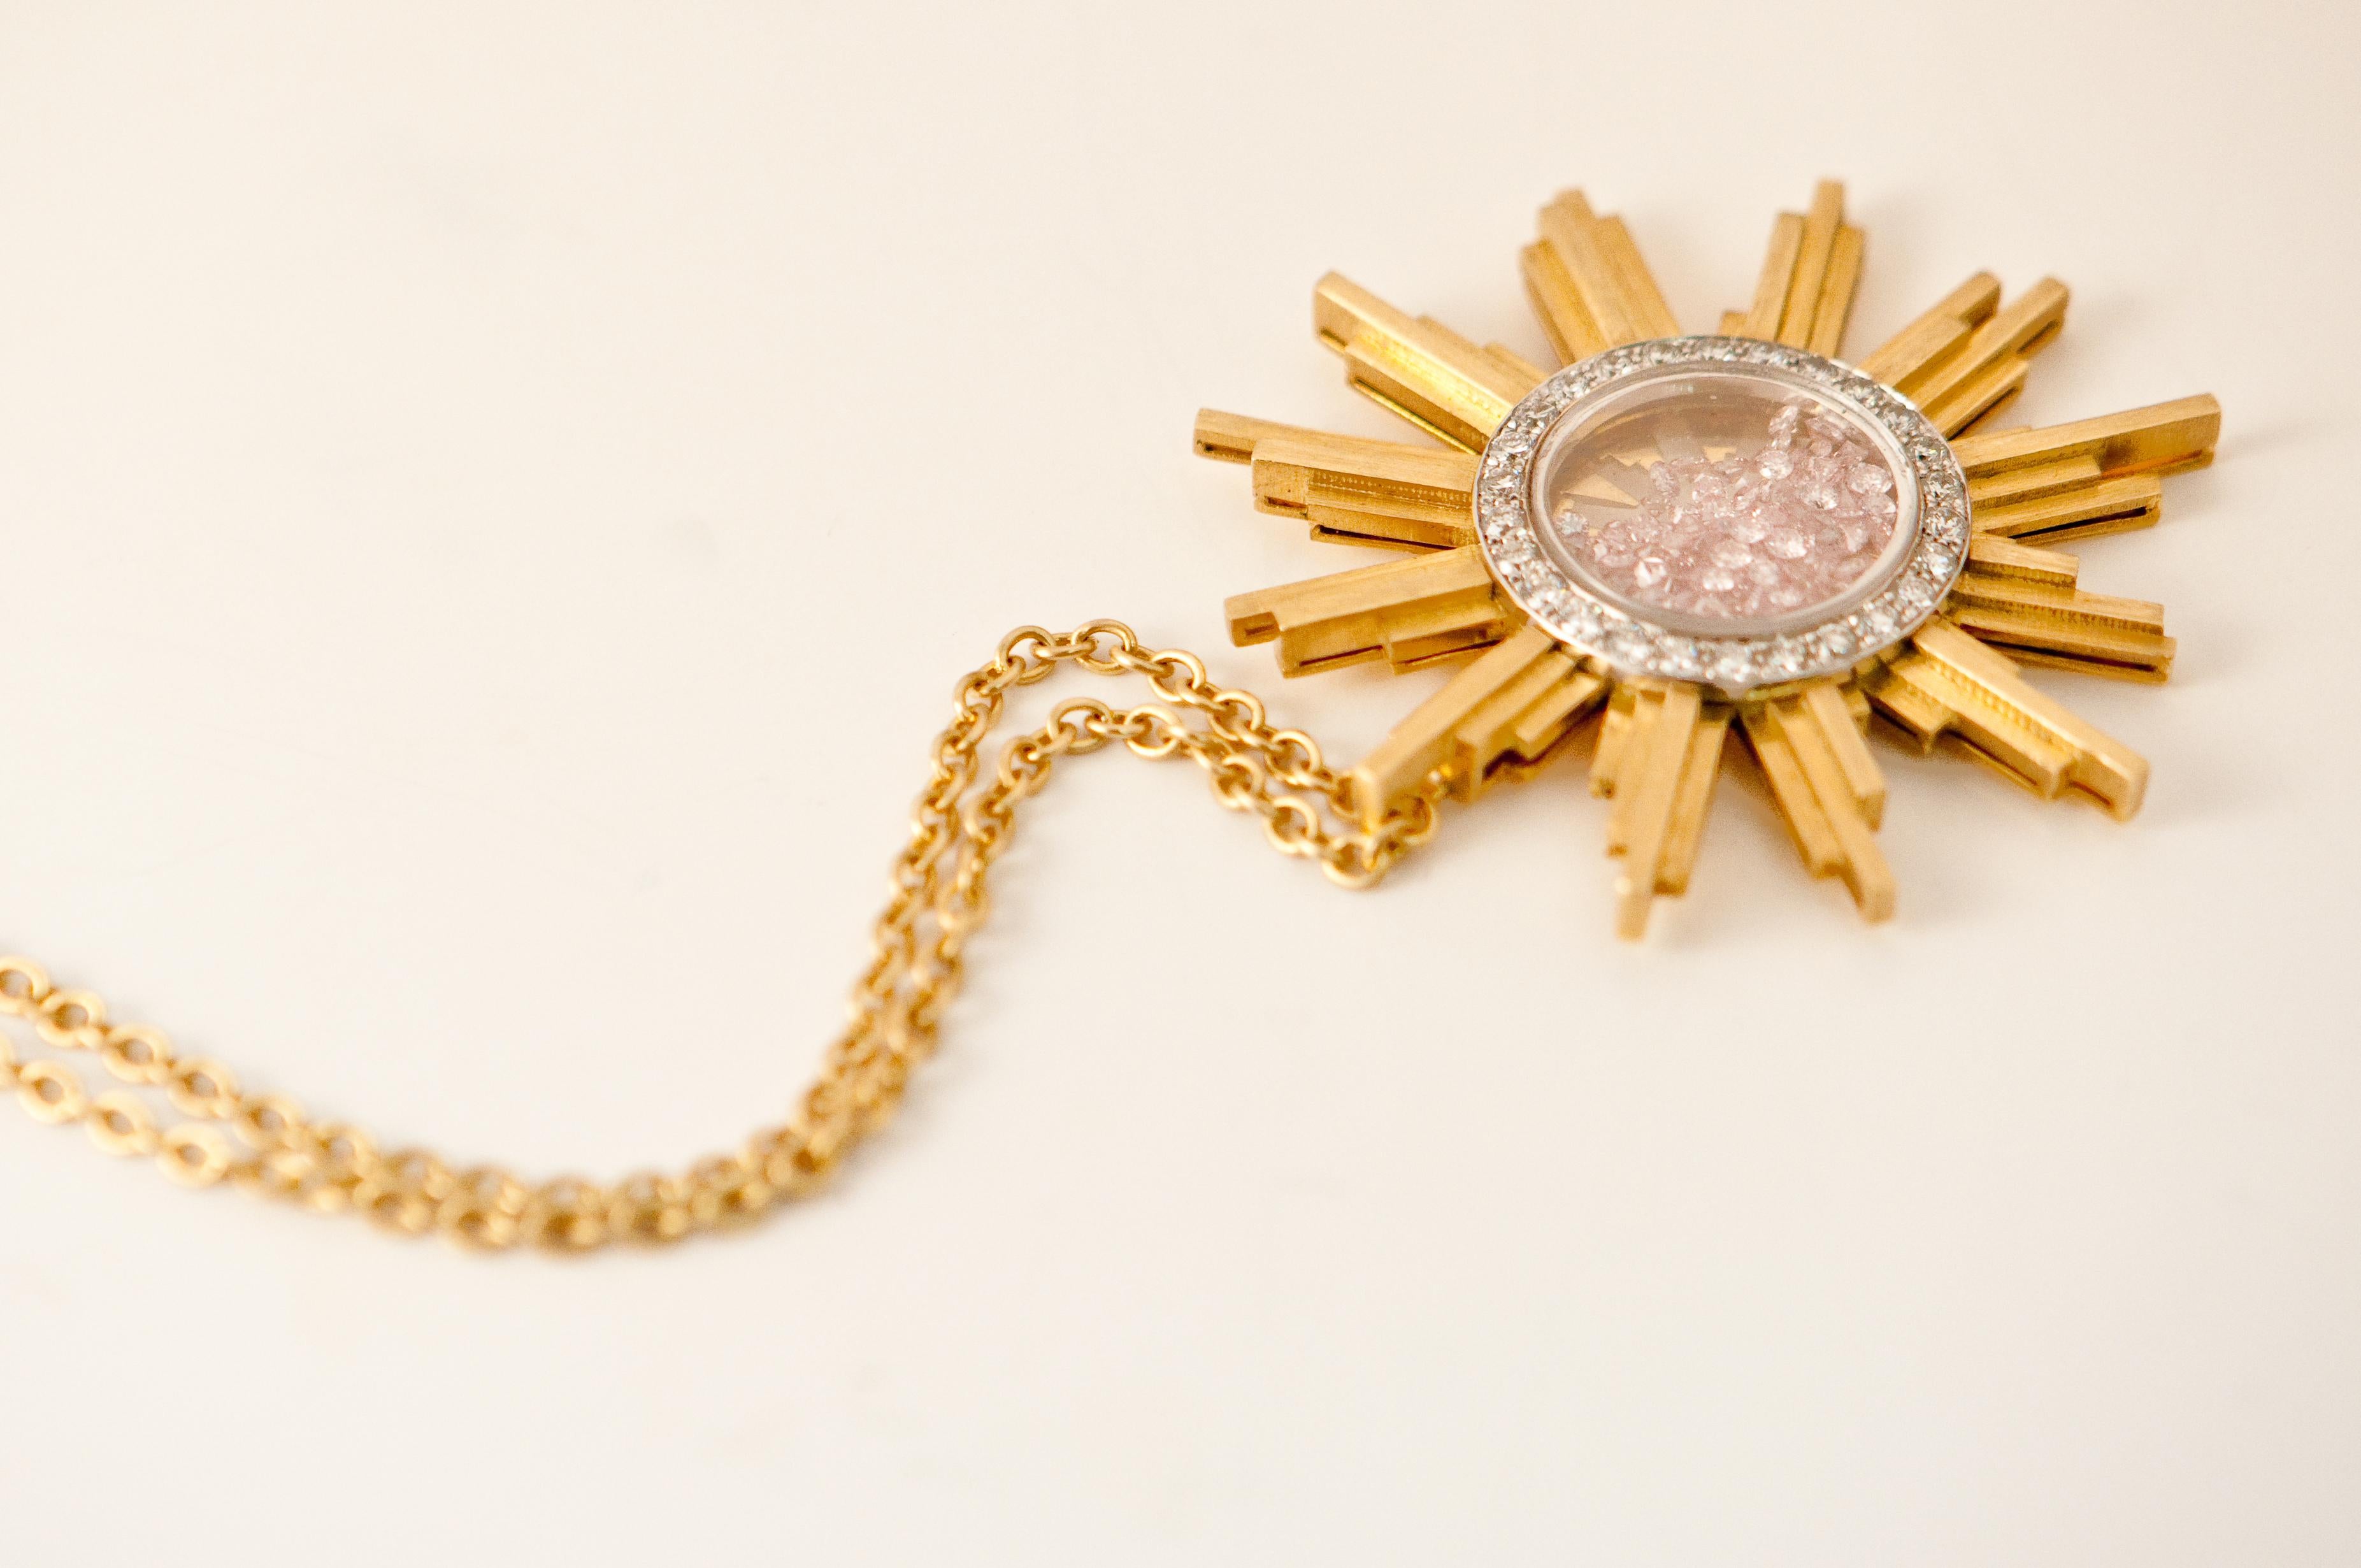 Women's or Men's Necklace, Yellow Gold Sun 34 Grams, Diamonds Withe and Pink 2.27 Carat, Unique